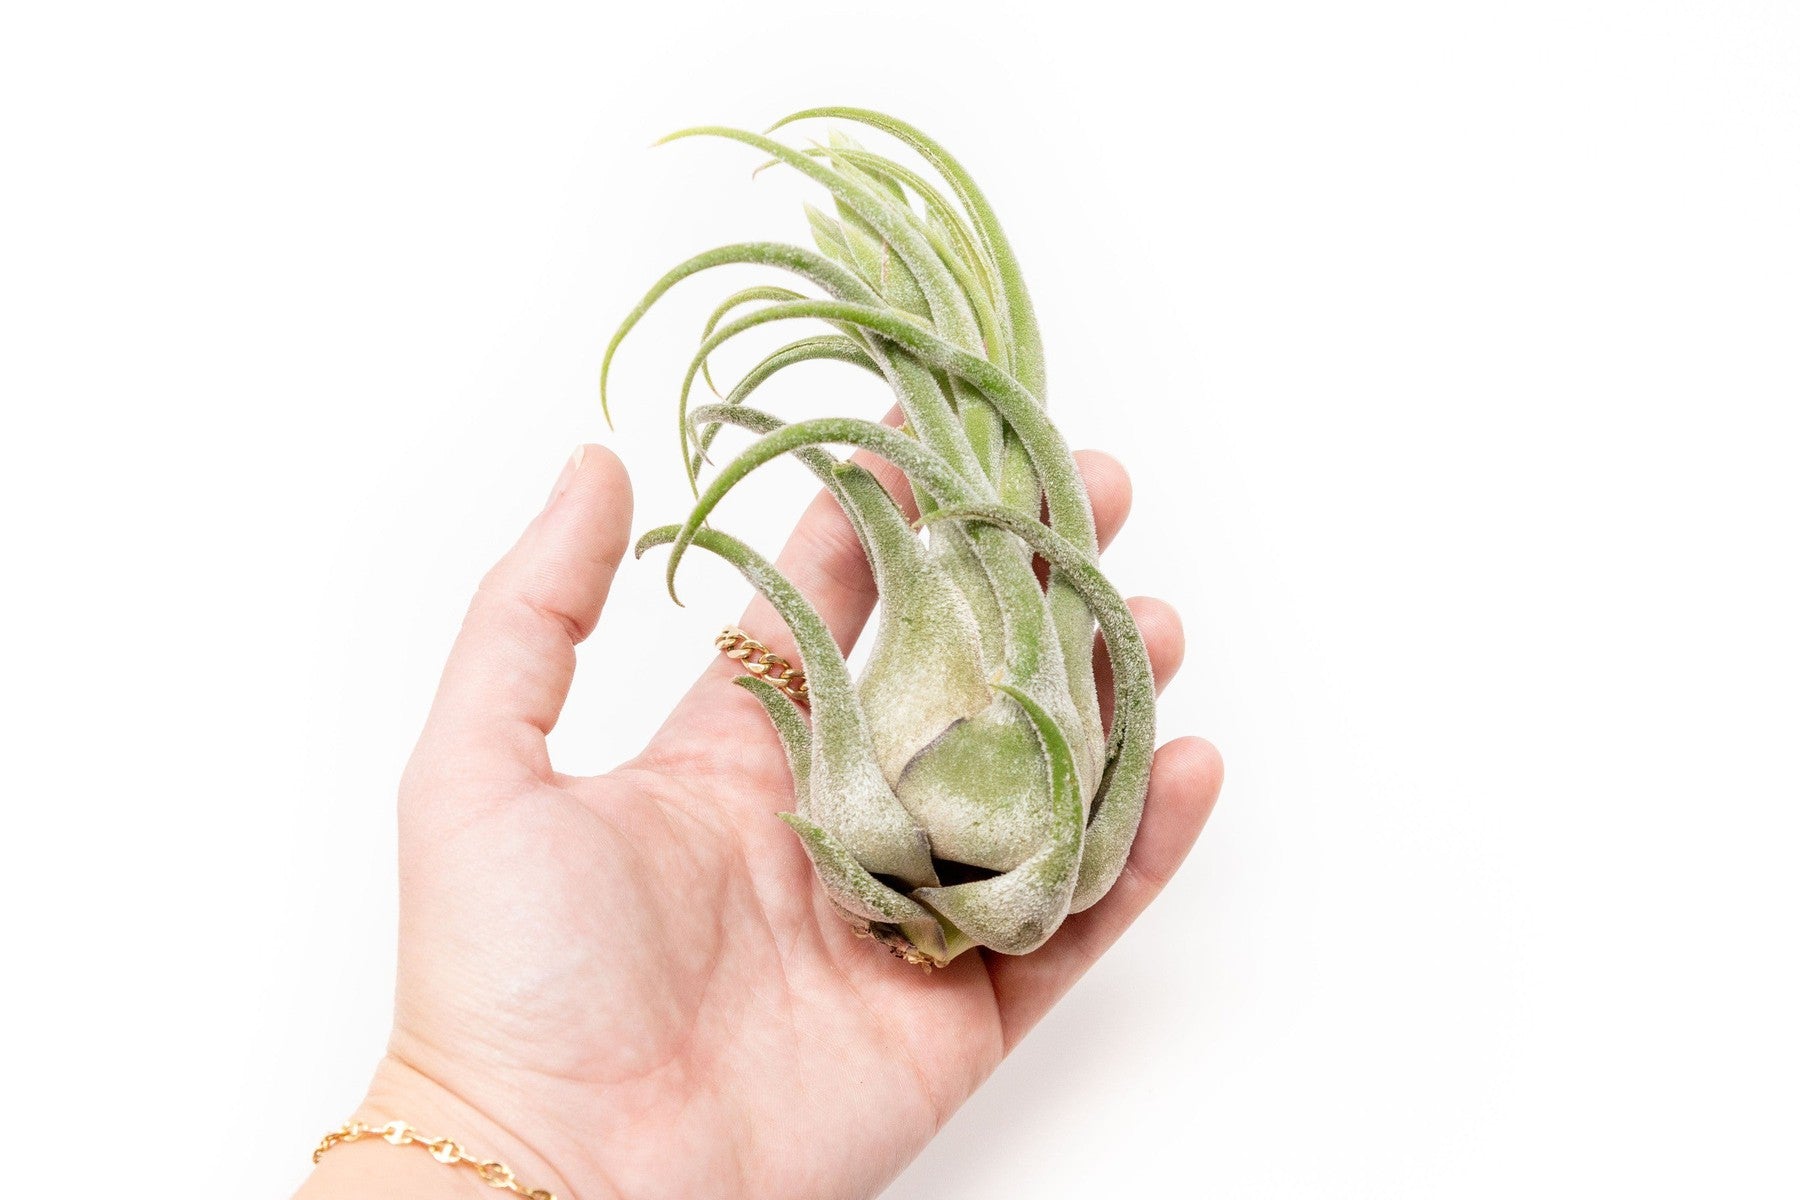 SALE - Tillandsia Seleriana Air Plants - Set of 5 or 10 - 50% Off-airplant-The Succulent Source